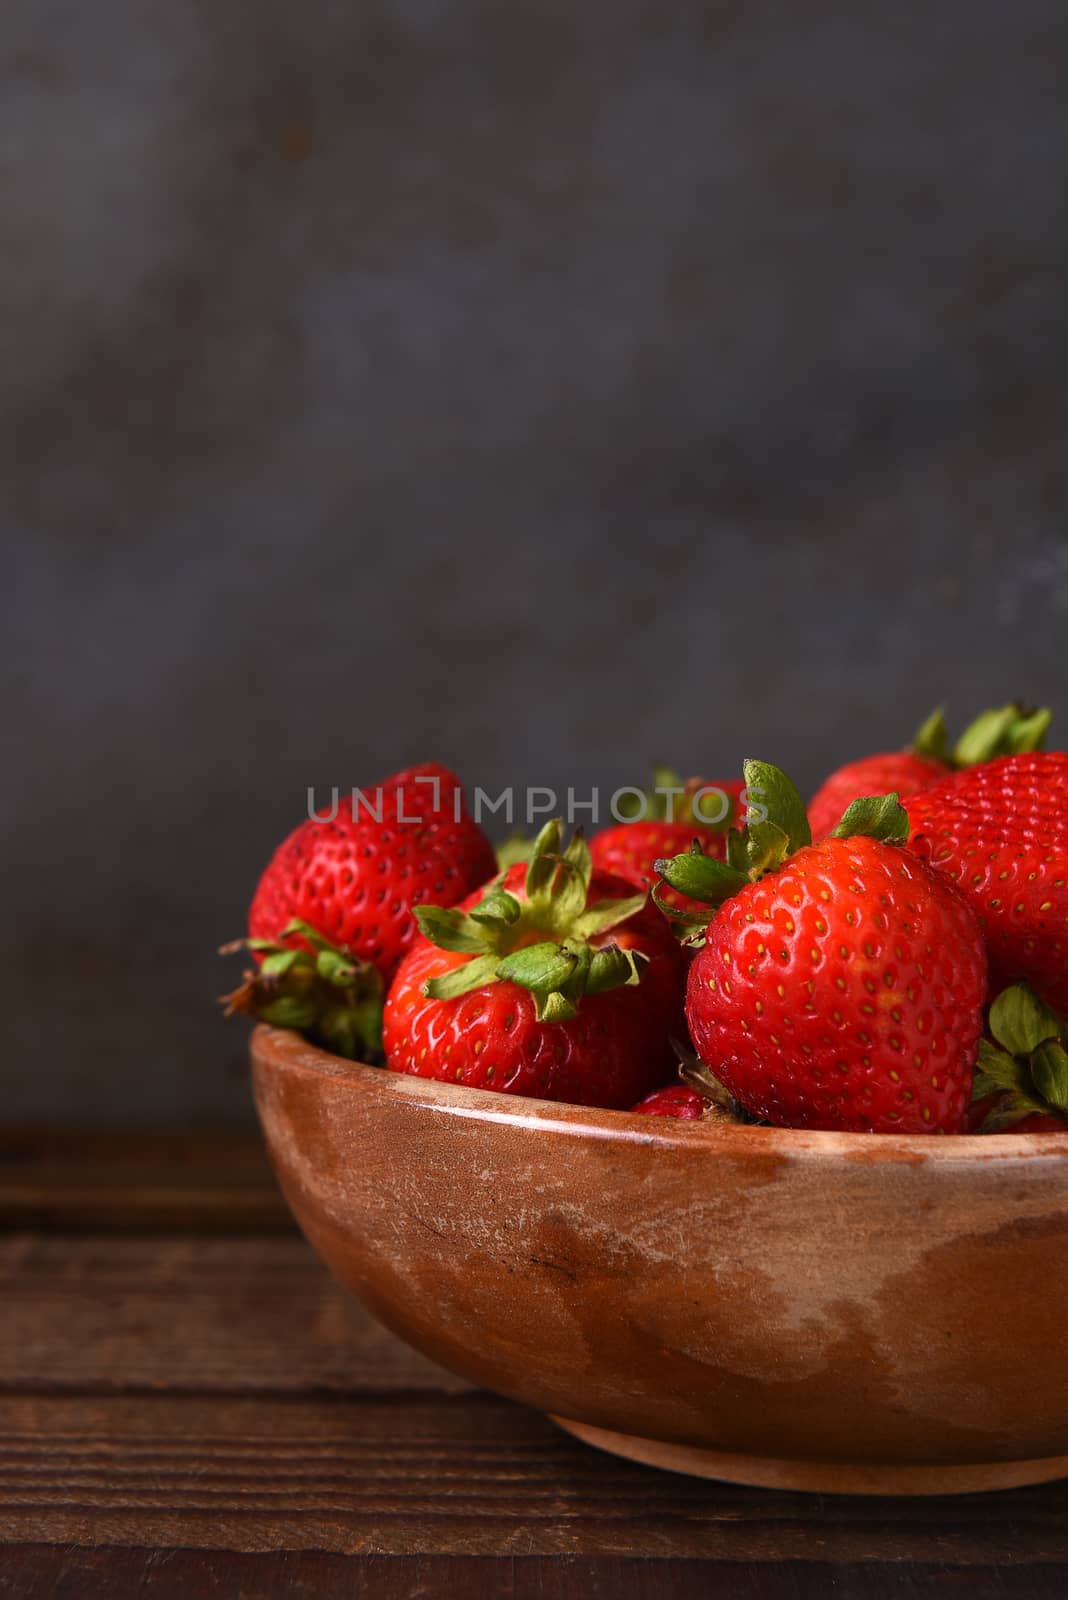 Still life of a bowl full of fresh picked strawberries on a wood table. Vertical format with copy space.